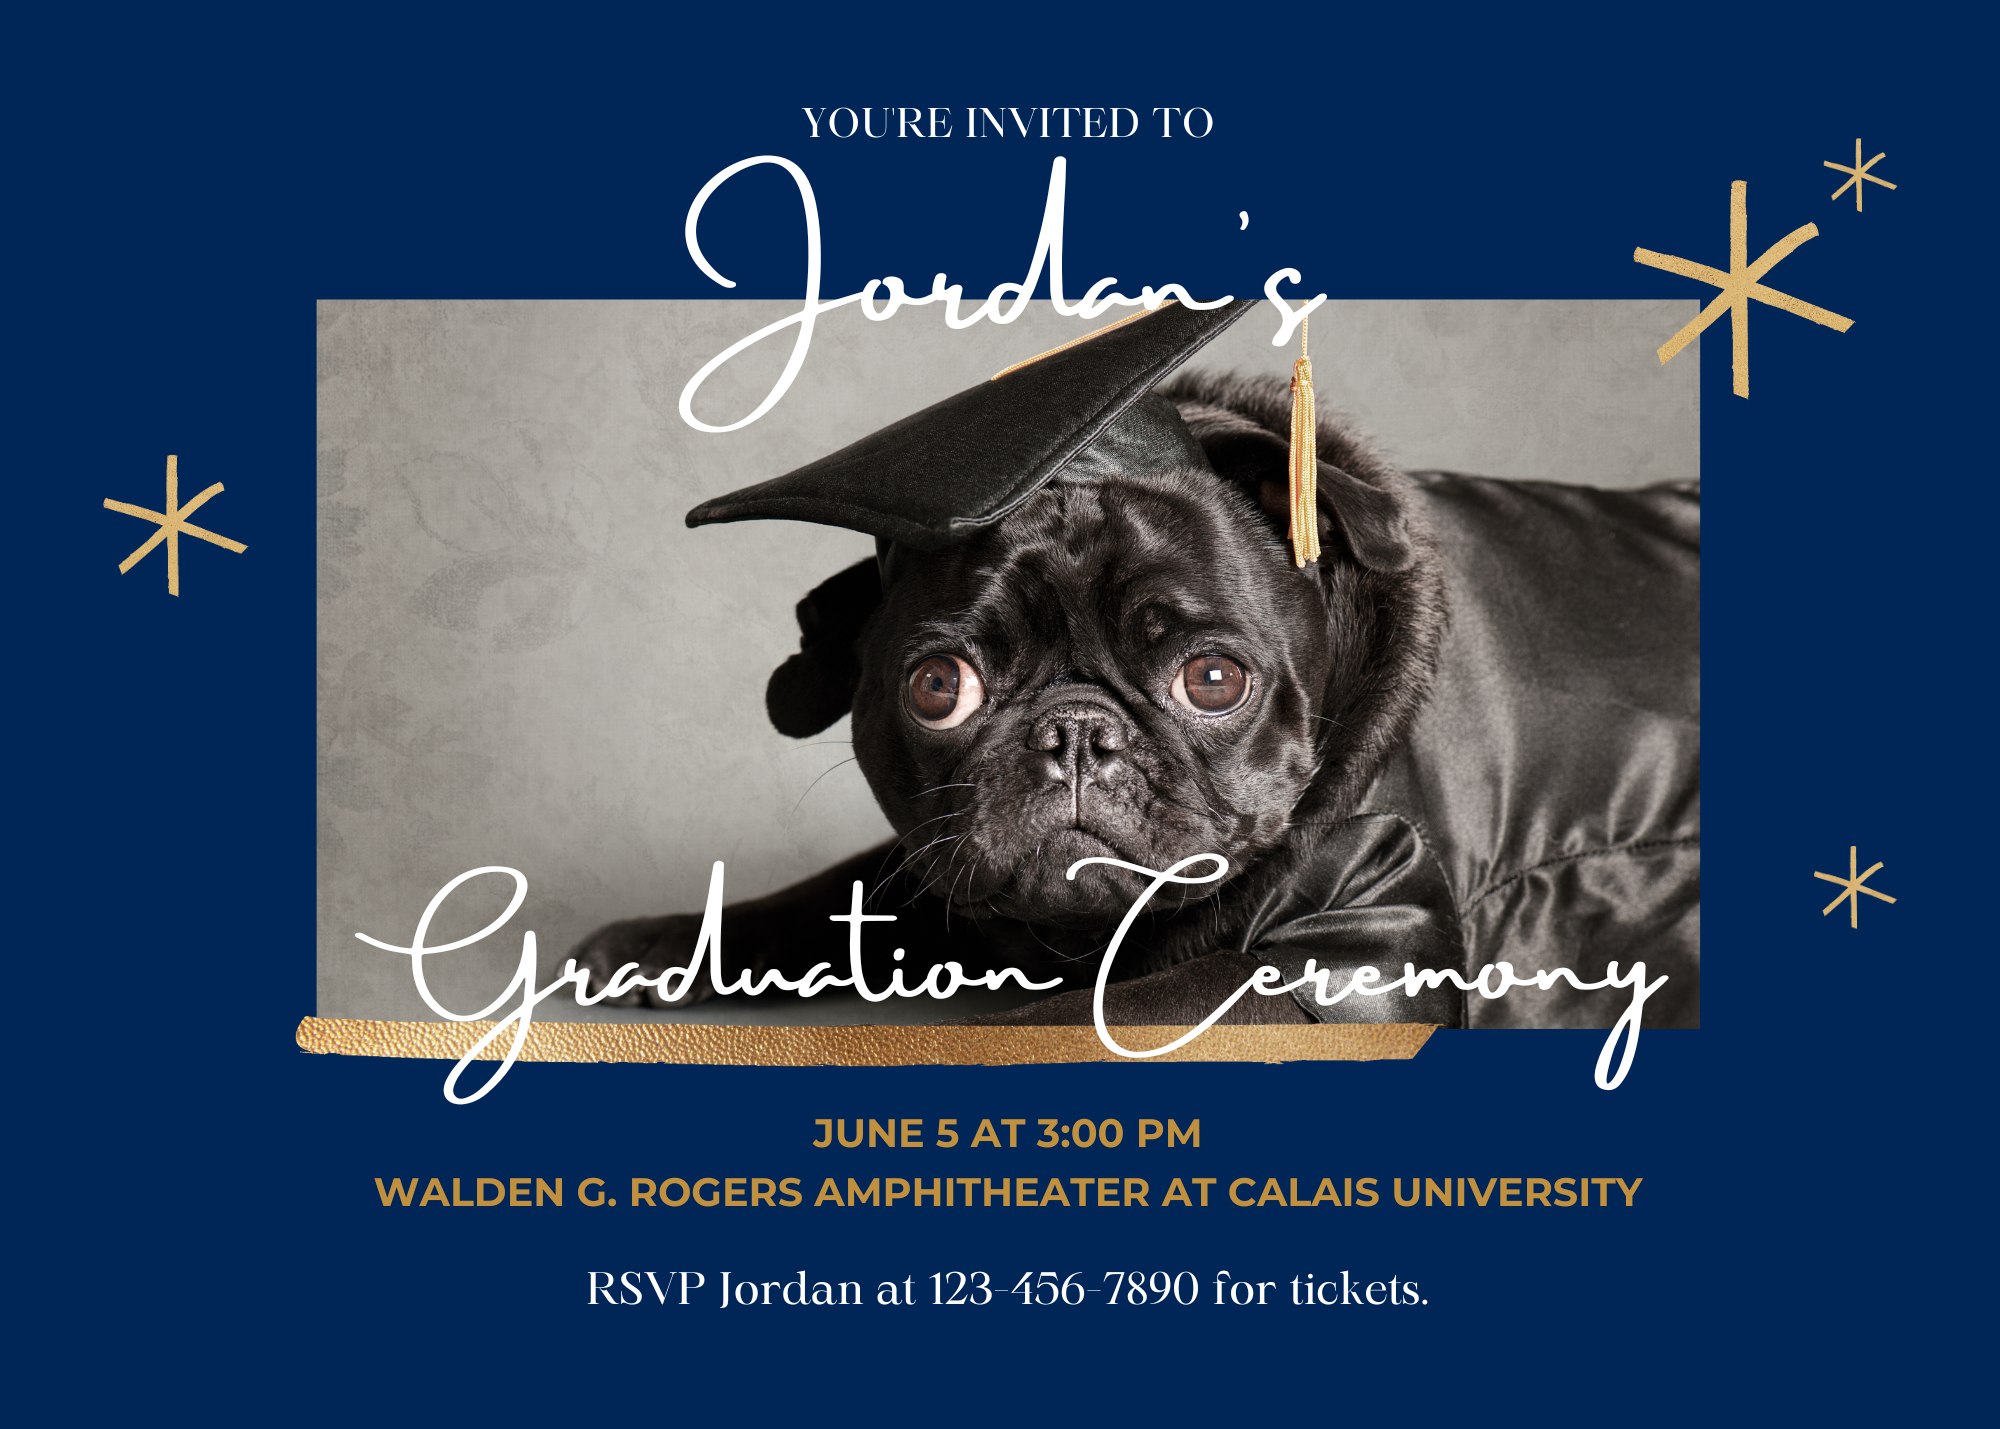 An invitation for a fake graduation party featuring a small black pug wearing a graduation cap against a plain navy blue background.